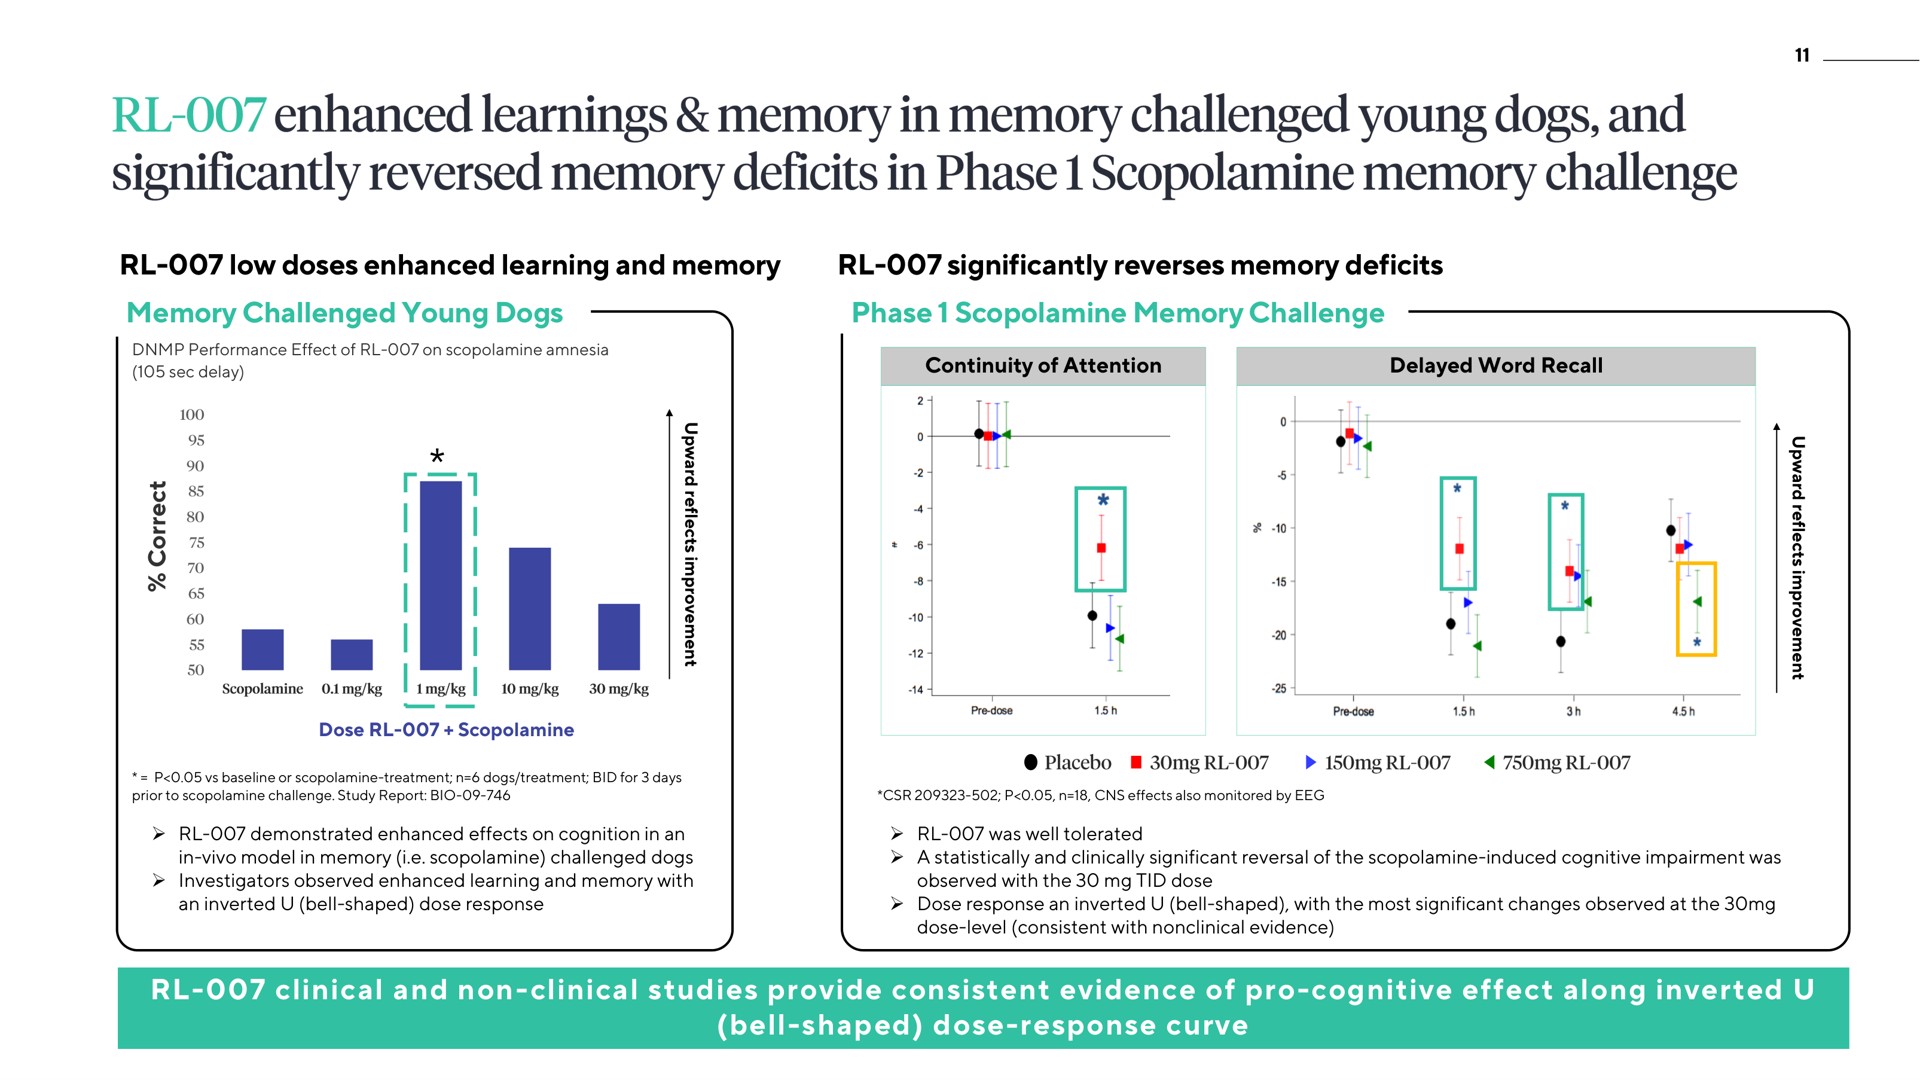 low doses enhanced learning and memory significantly reverses memory deficits memory challenged young dogs phase scopolamine memory challenge clinical and non clinical studies provide consistent evidence of pro cognitive effect along inverted bell shaped dose response curve learnings in reversed in | ATAI